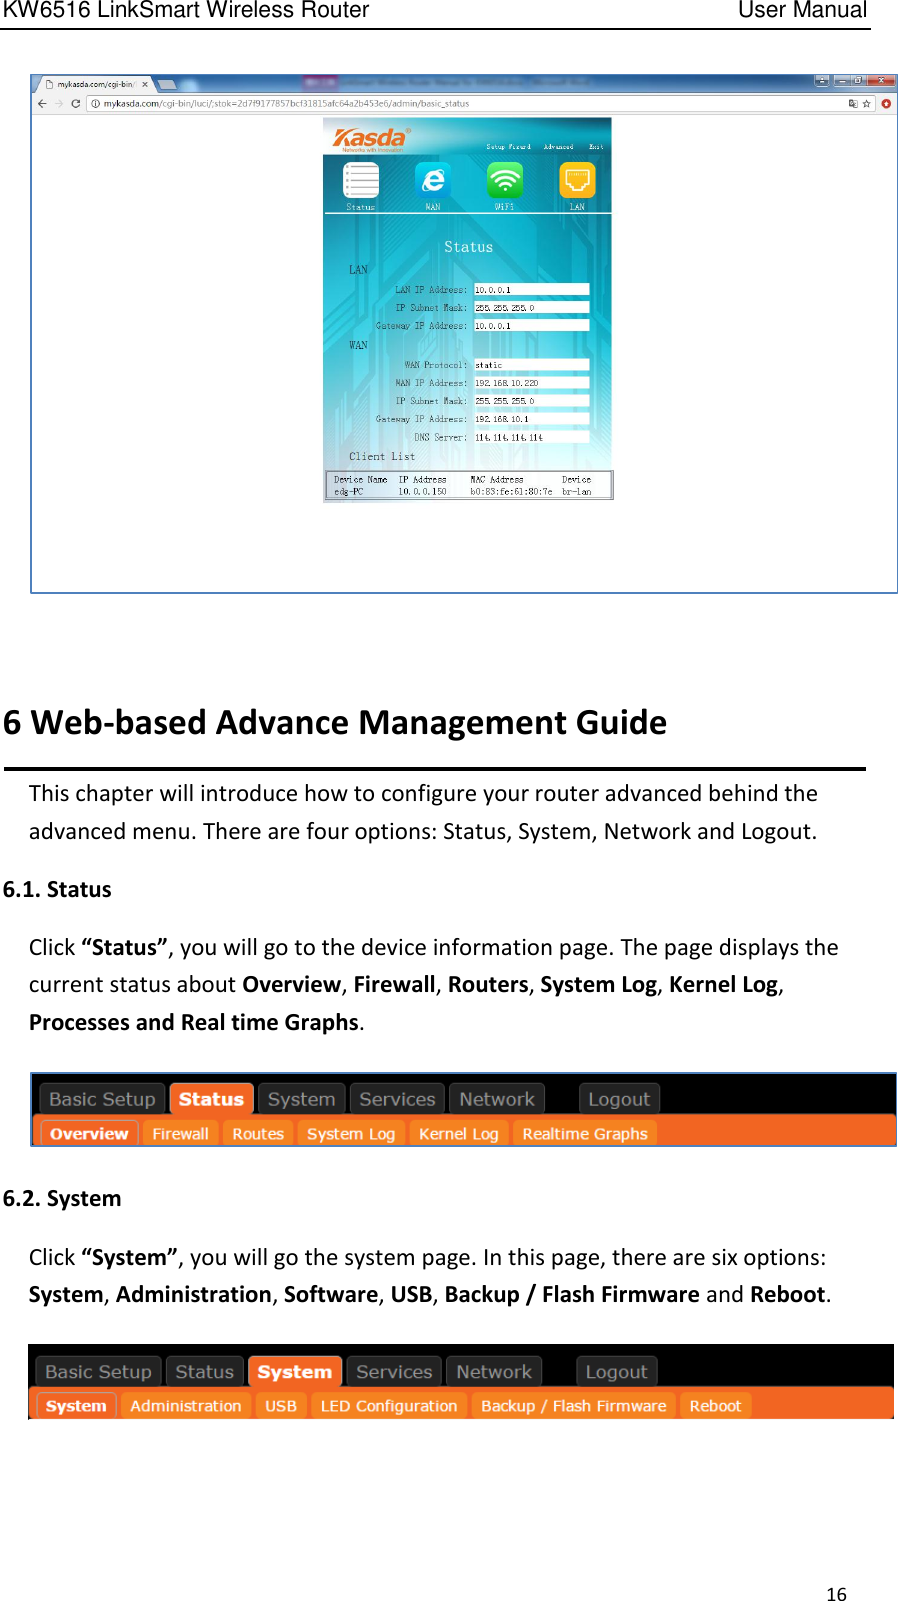 KW6516 LinkSmart Wireless Router         User Manual 16   6 Web-based Advance Management Guide This chapter will introduce how to configure your router advanced behind the advanced menu. There are four options: Status, System, Network and Logout.   6.1. Status Click “Status”, you will go to the device information page. The page displays the current status about Overview, Firewall, Routers, System Log, Kernel Log, Processes and Real time Graphs.    6.2. System Click “System”, you will go the system page. In this page, there are six options: System, Administration, Software, USB, Backup / Flash Firmware and Reboot.   